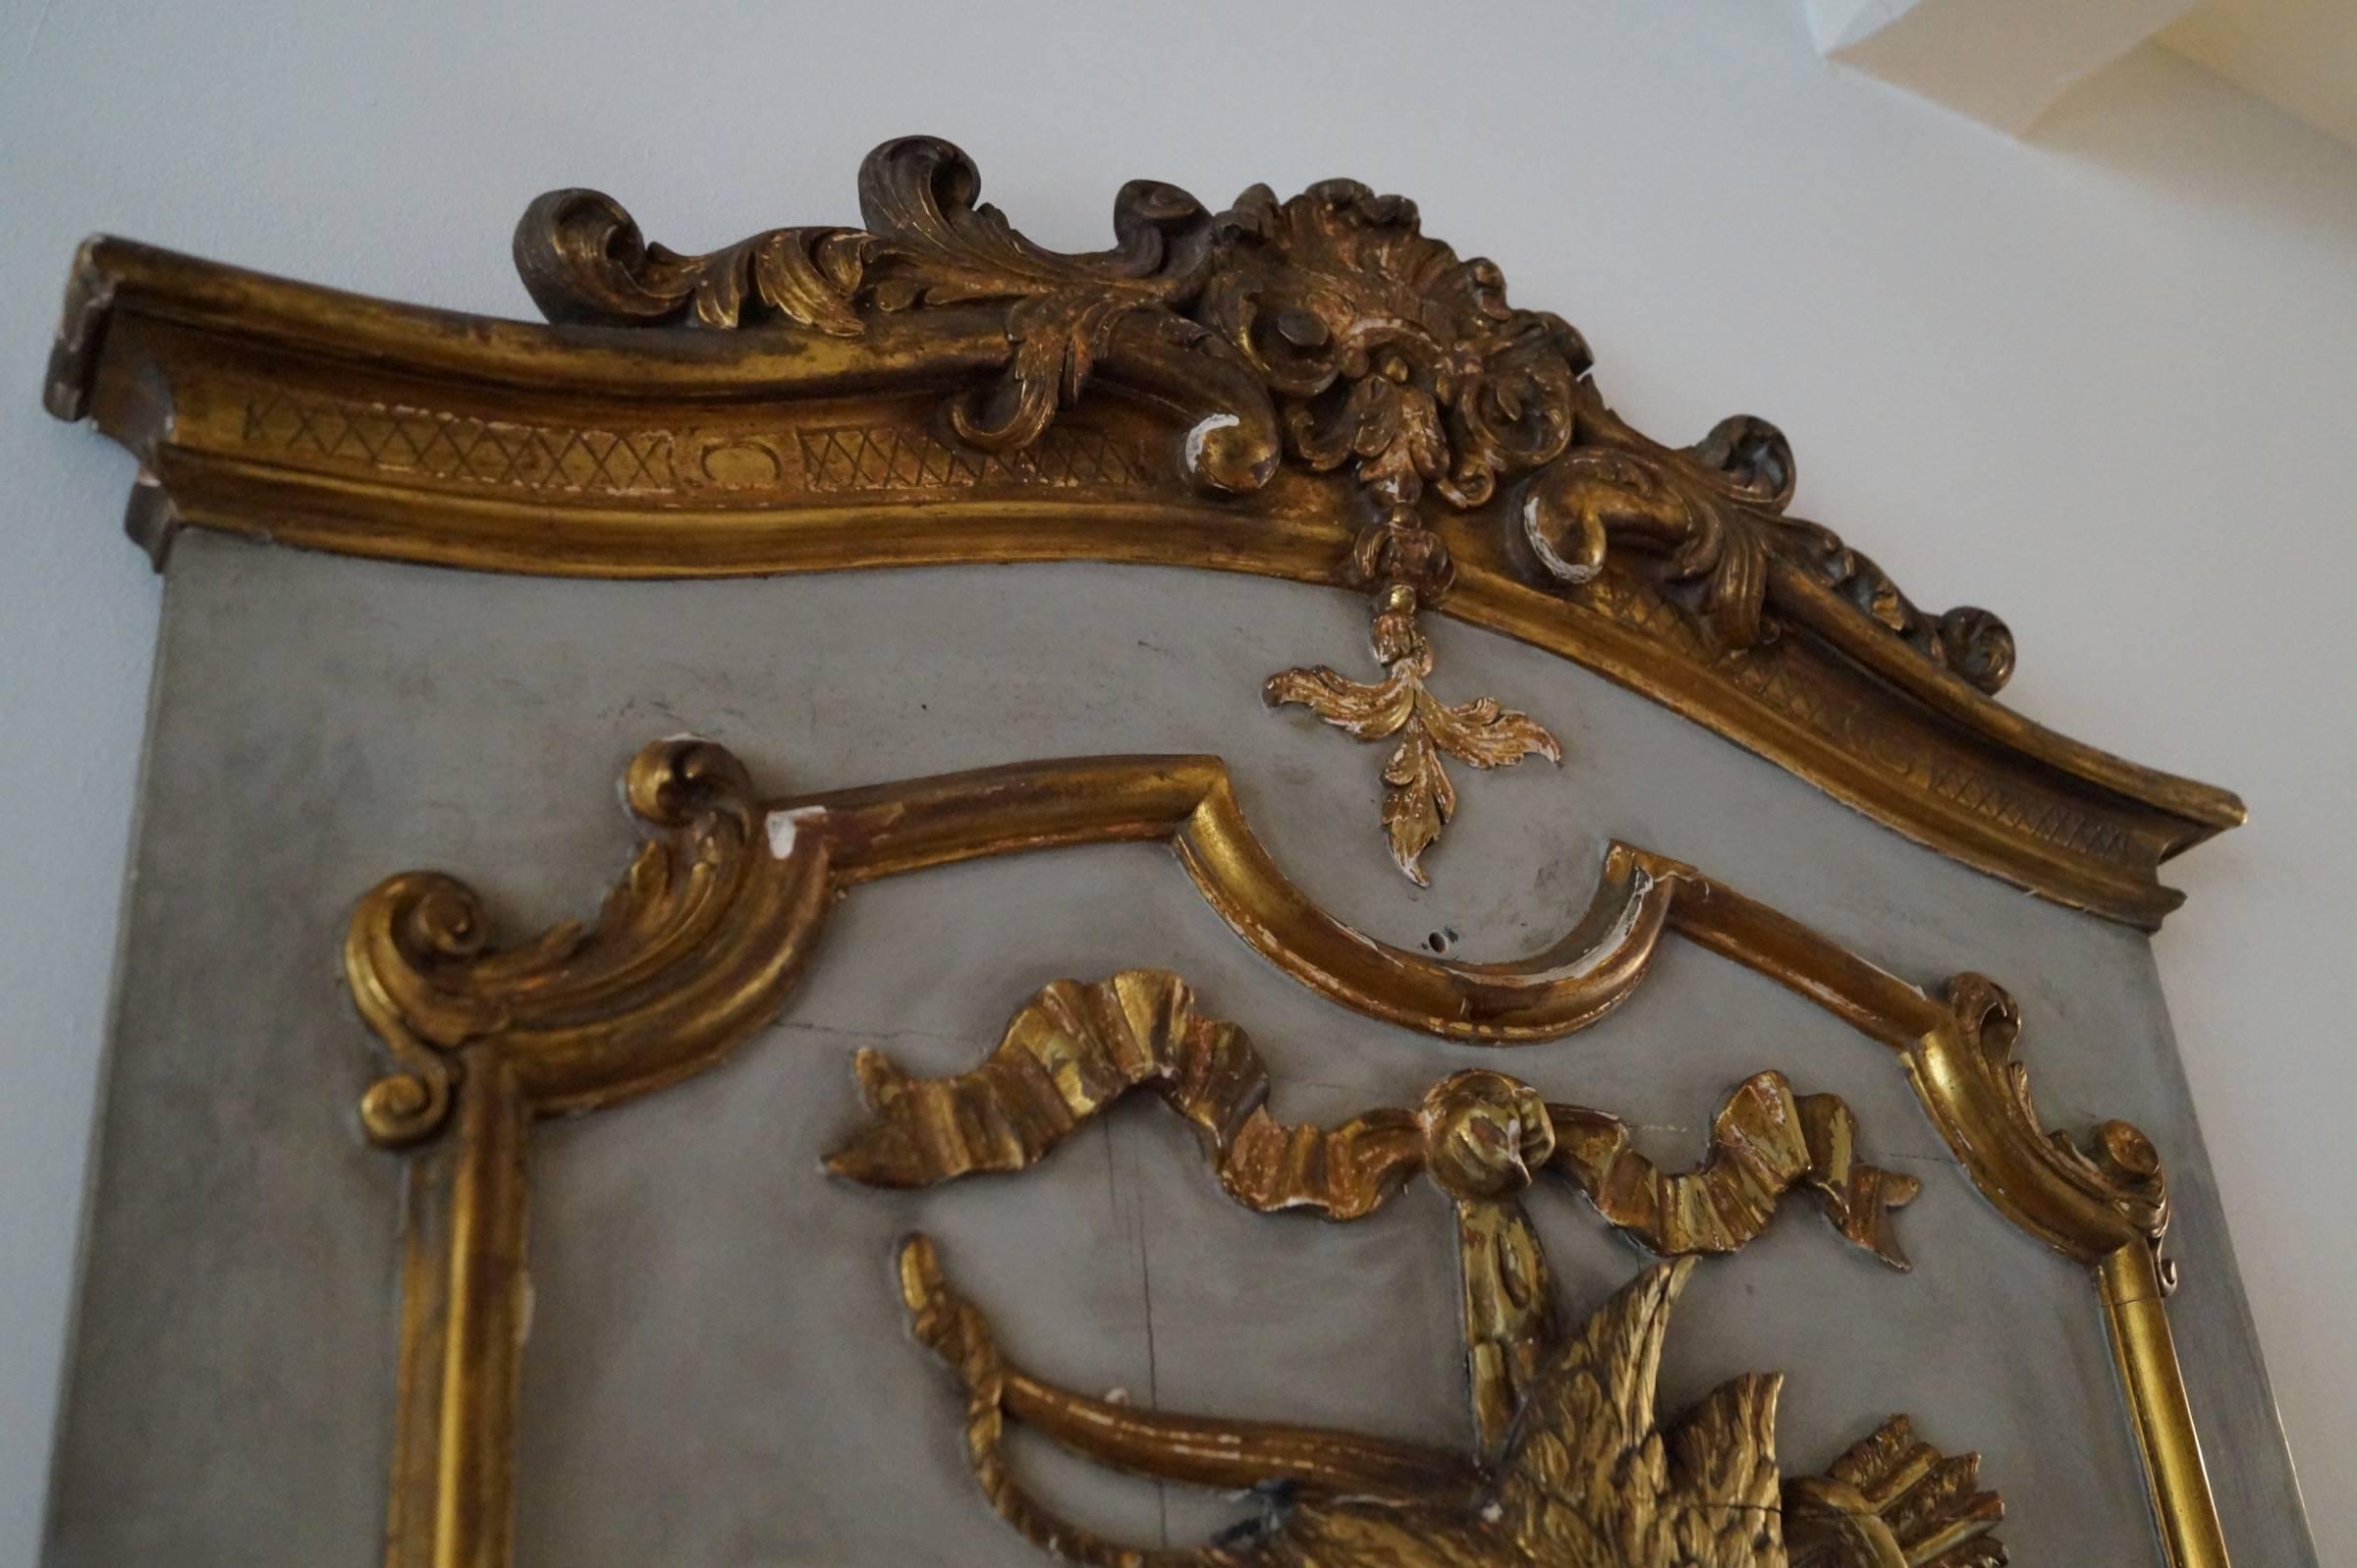 18th Century Rococo Mirror Hand-Carved and Gilded, Trumeau or over Mantel with Hunting Decor